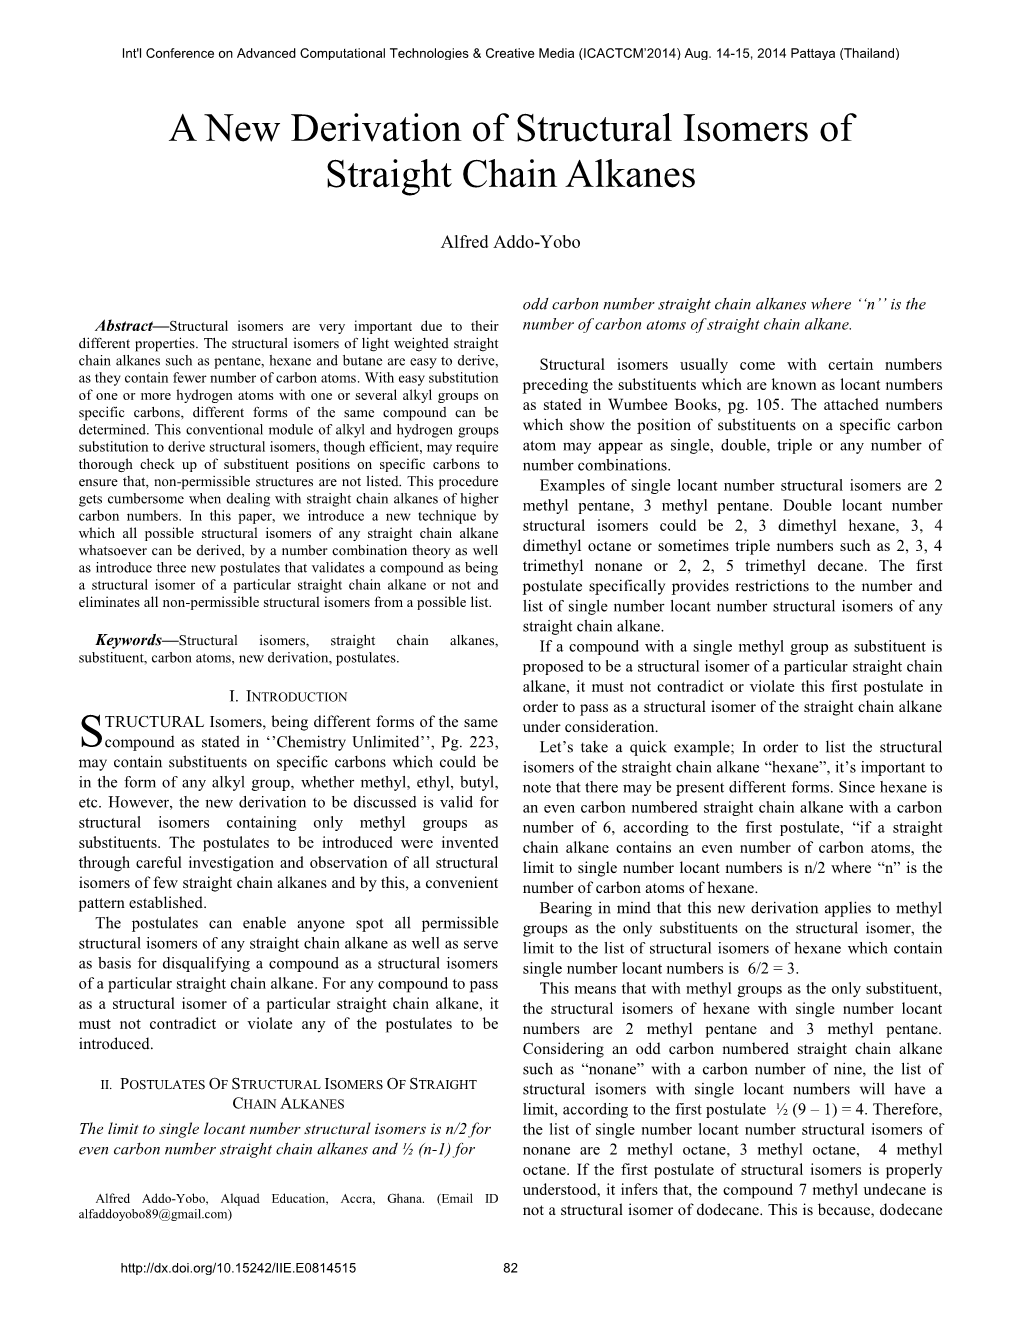 A New Derivation of Structural Isomers of Straight Chain Alkanes